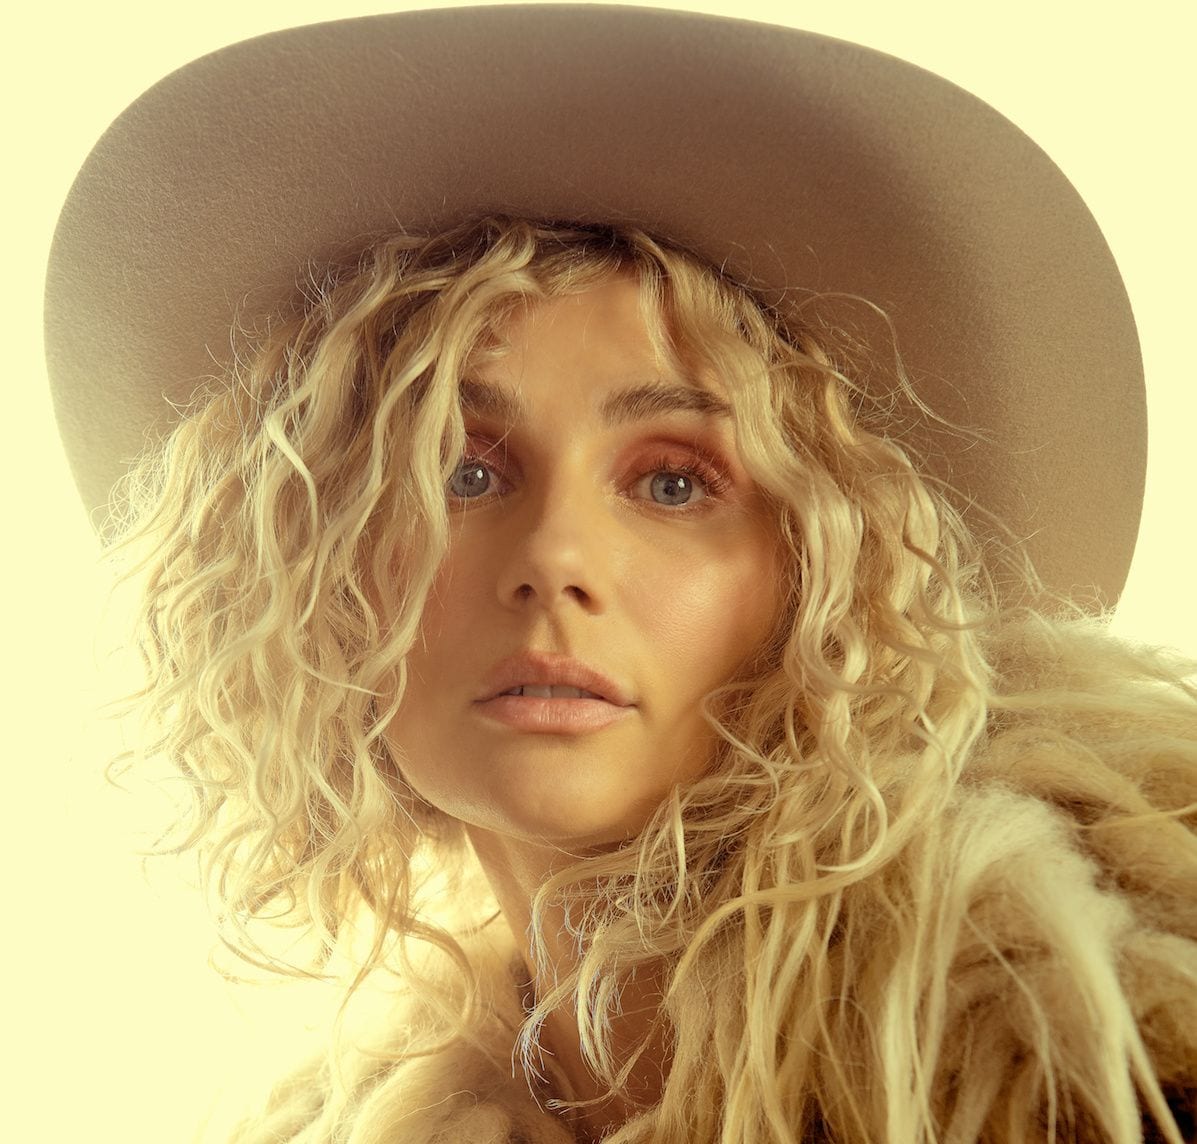 Former ‘Nashville’ Star Clare Bowen Brings Show of Strength, Hope to